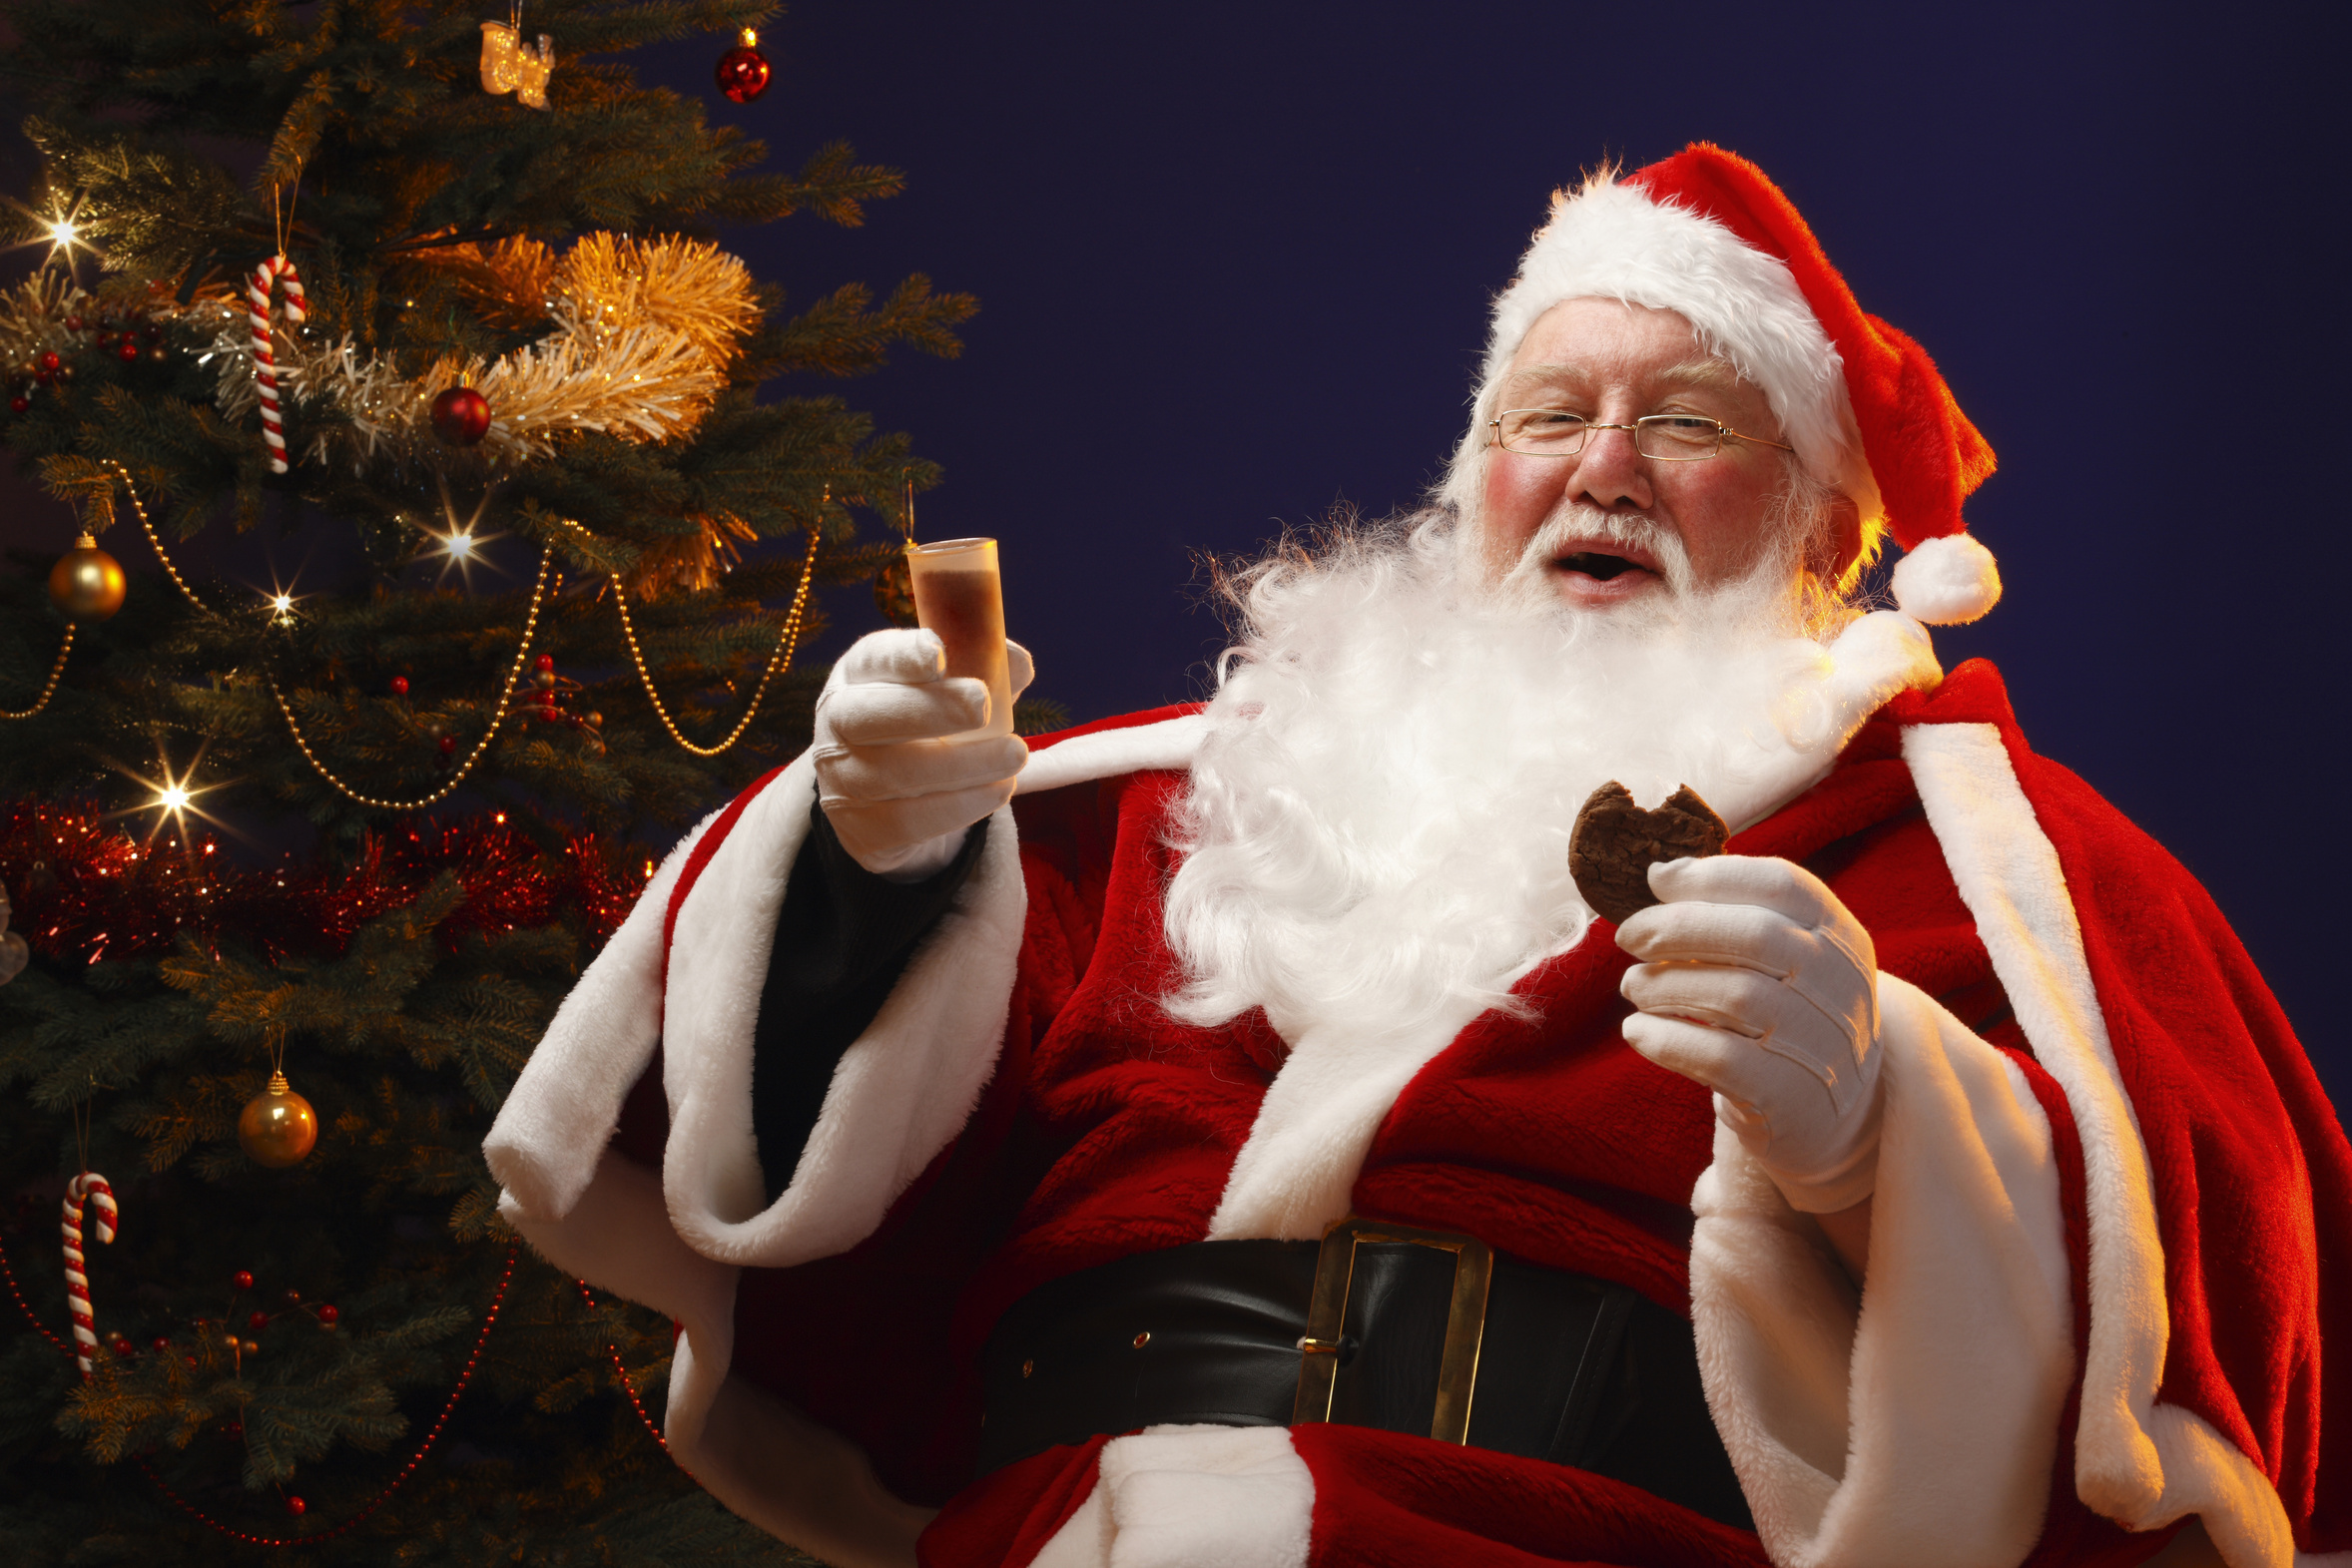 Santa Claus drinking sherry and eating a cookie by the fireplace and Christmas tree